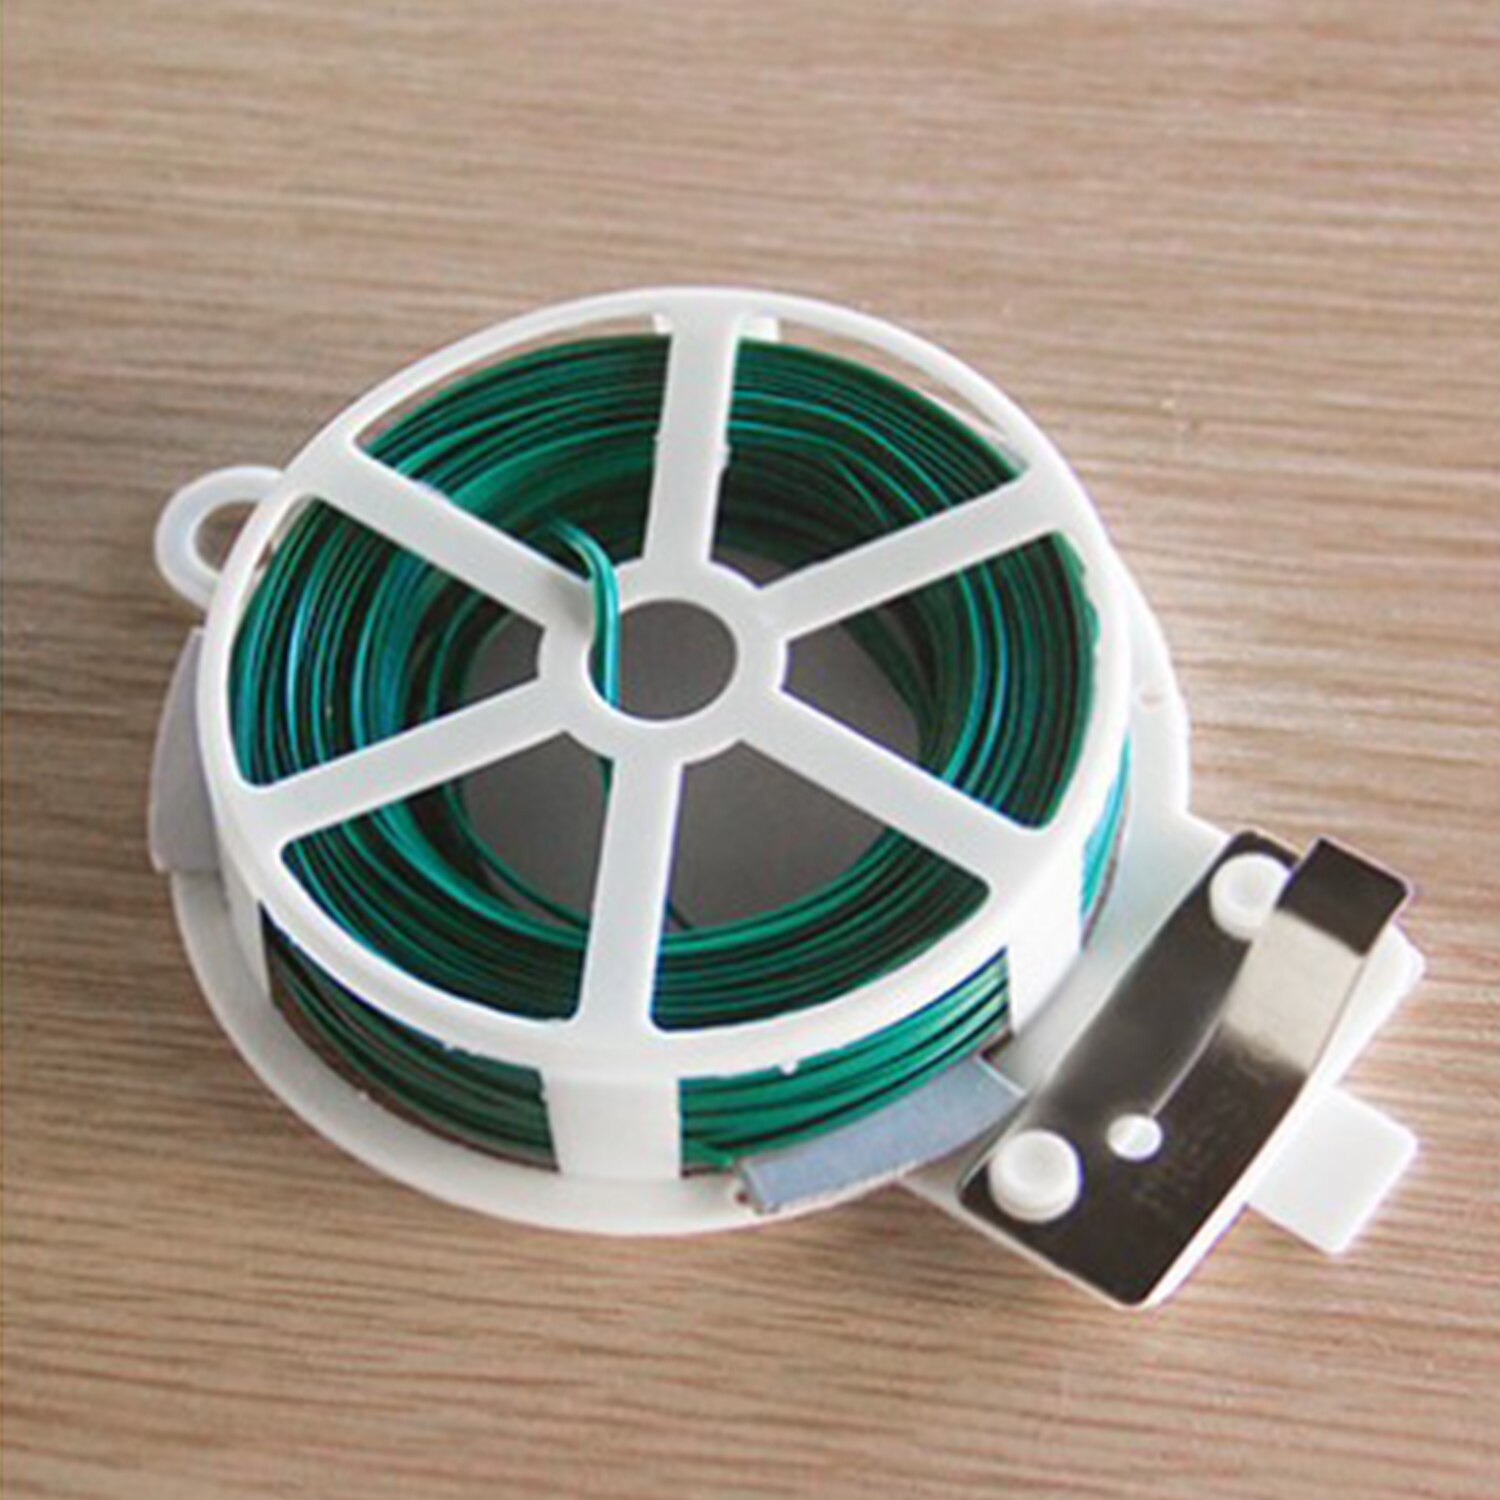 20/30/50/100m Garden Twine Plant Tie with Cutter for Gardening Plants Secure Vines Wrapping Cords Office Organization